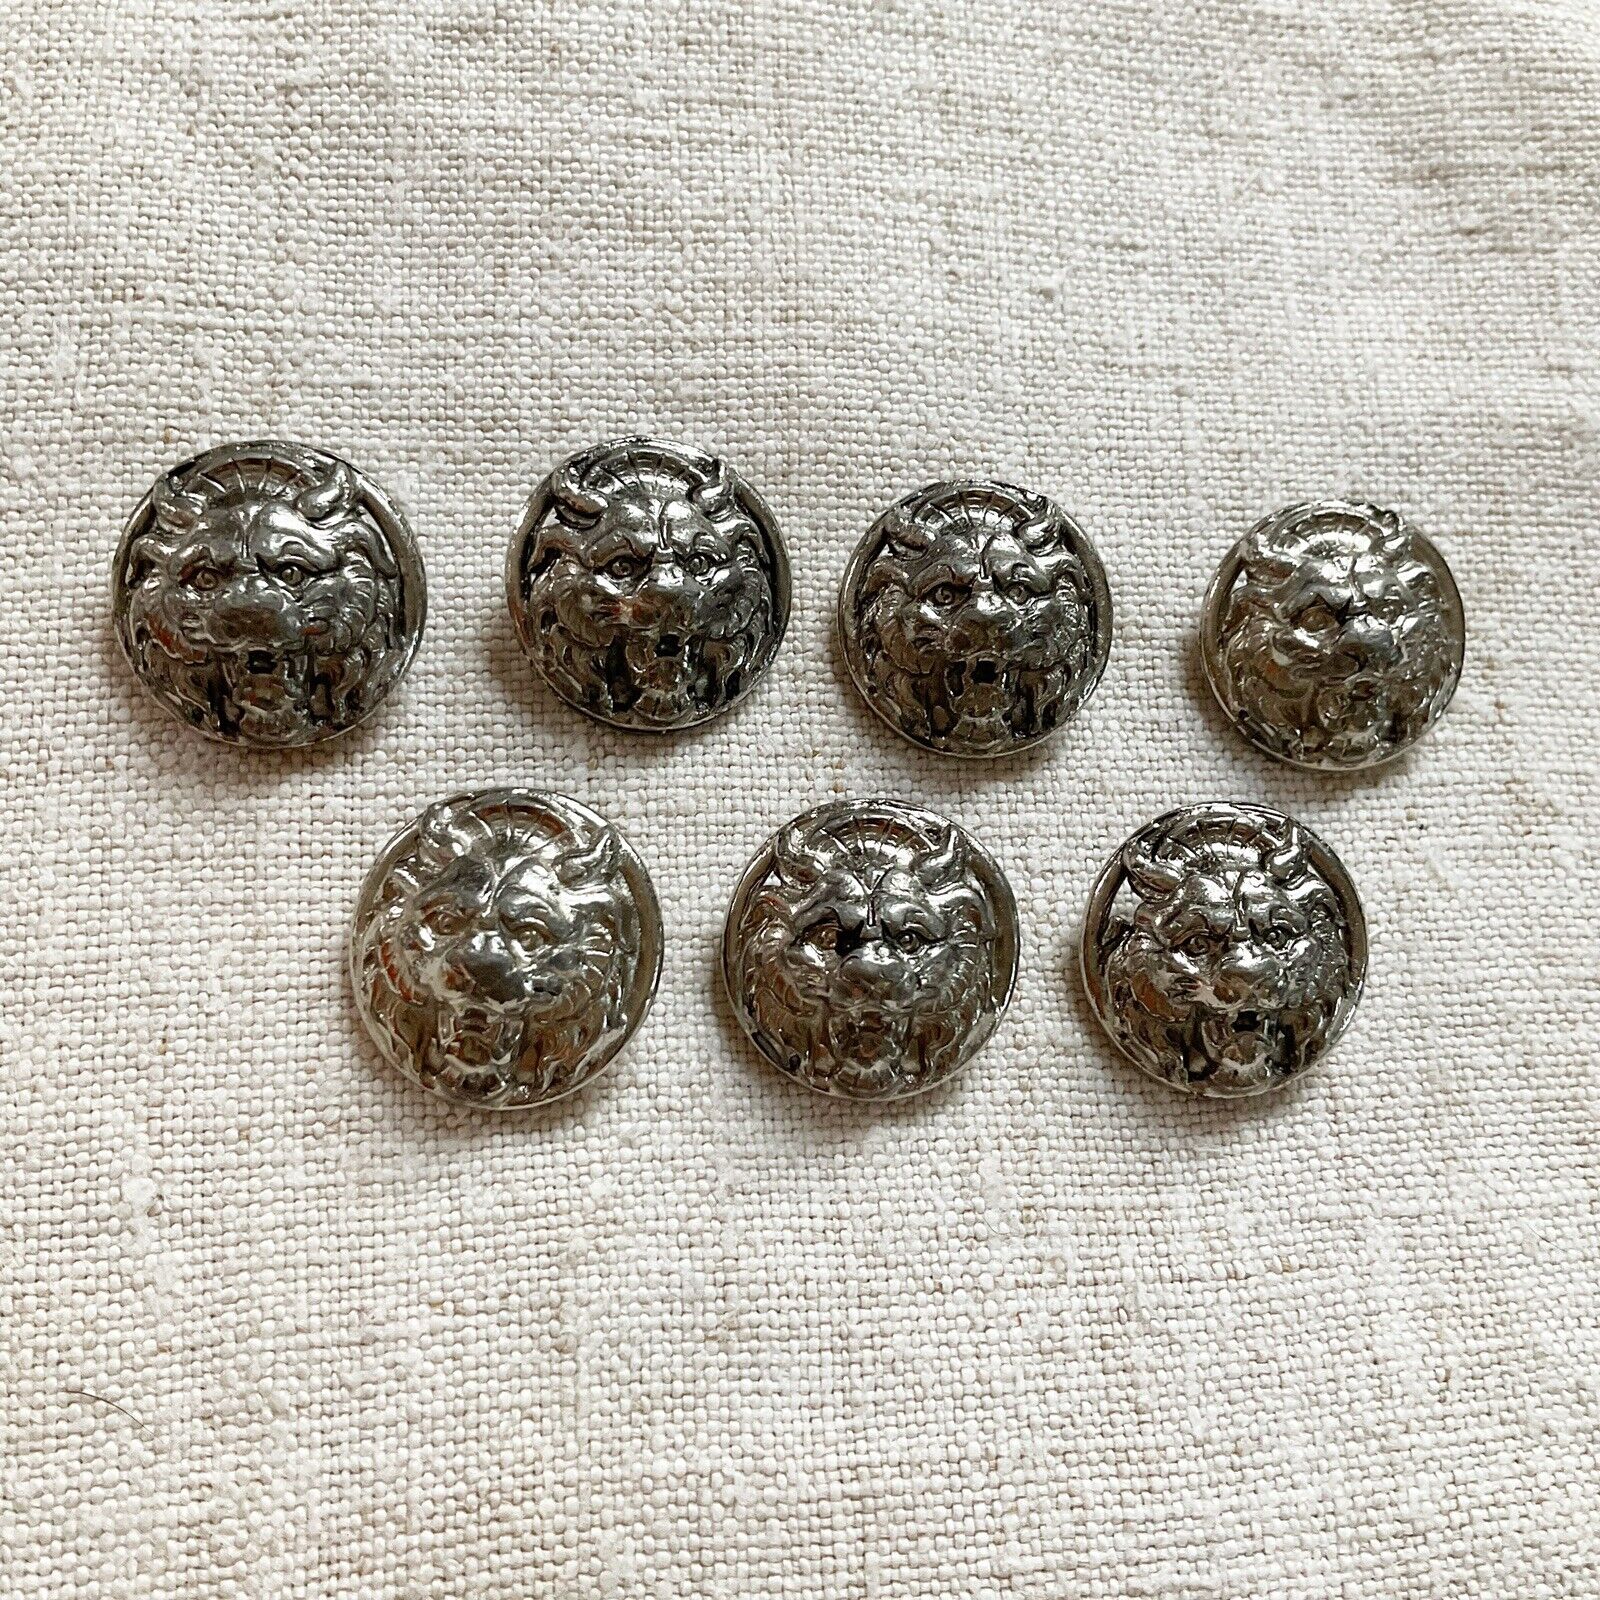 Vintage/metal Beast Face/head Silver Tone 3/4 Of An Inch Button Lot Of 7